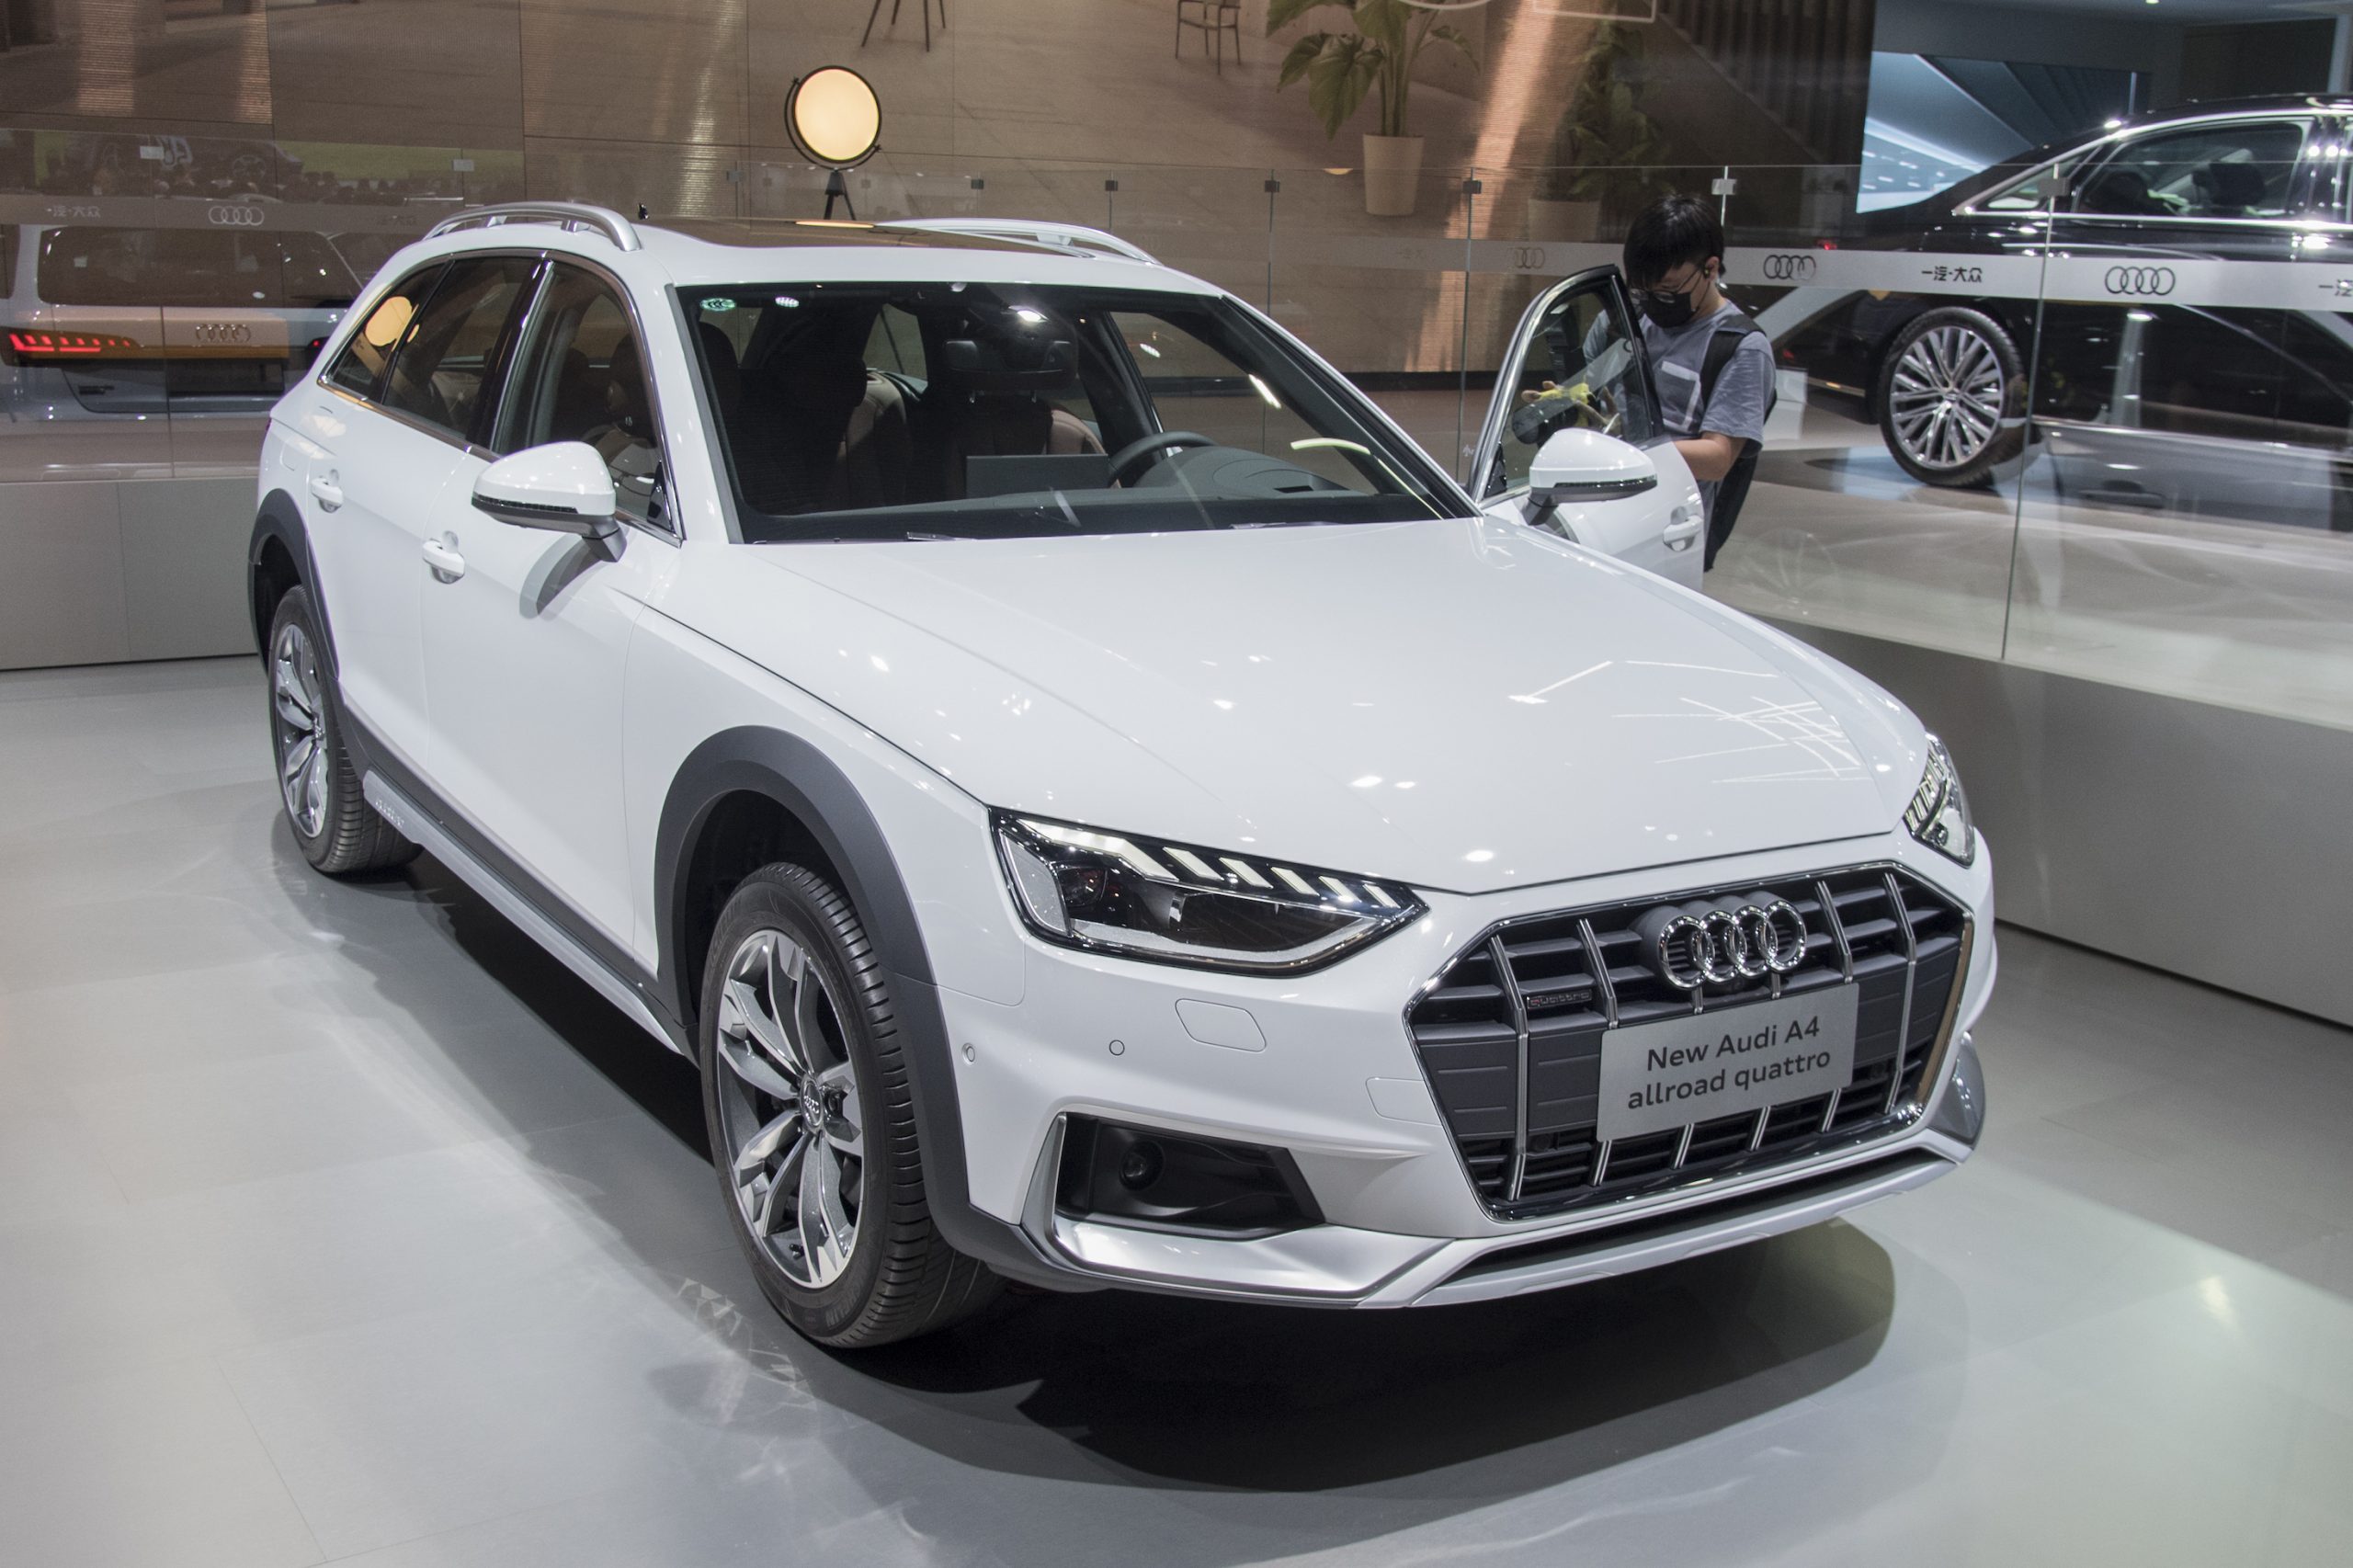 An Audi A4 allroad quattro vehicle is on display during the 18th Guangzhou International Automobile Exhibition